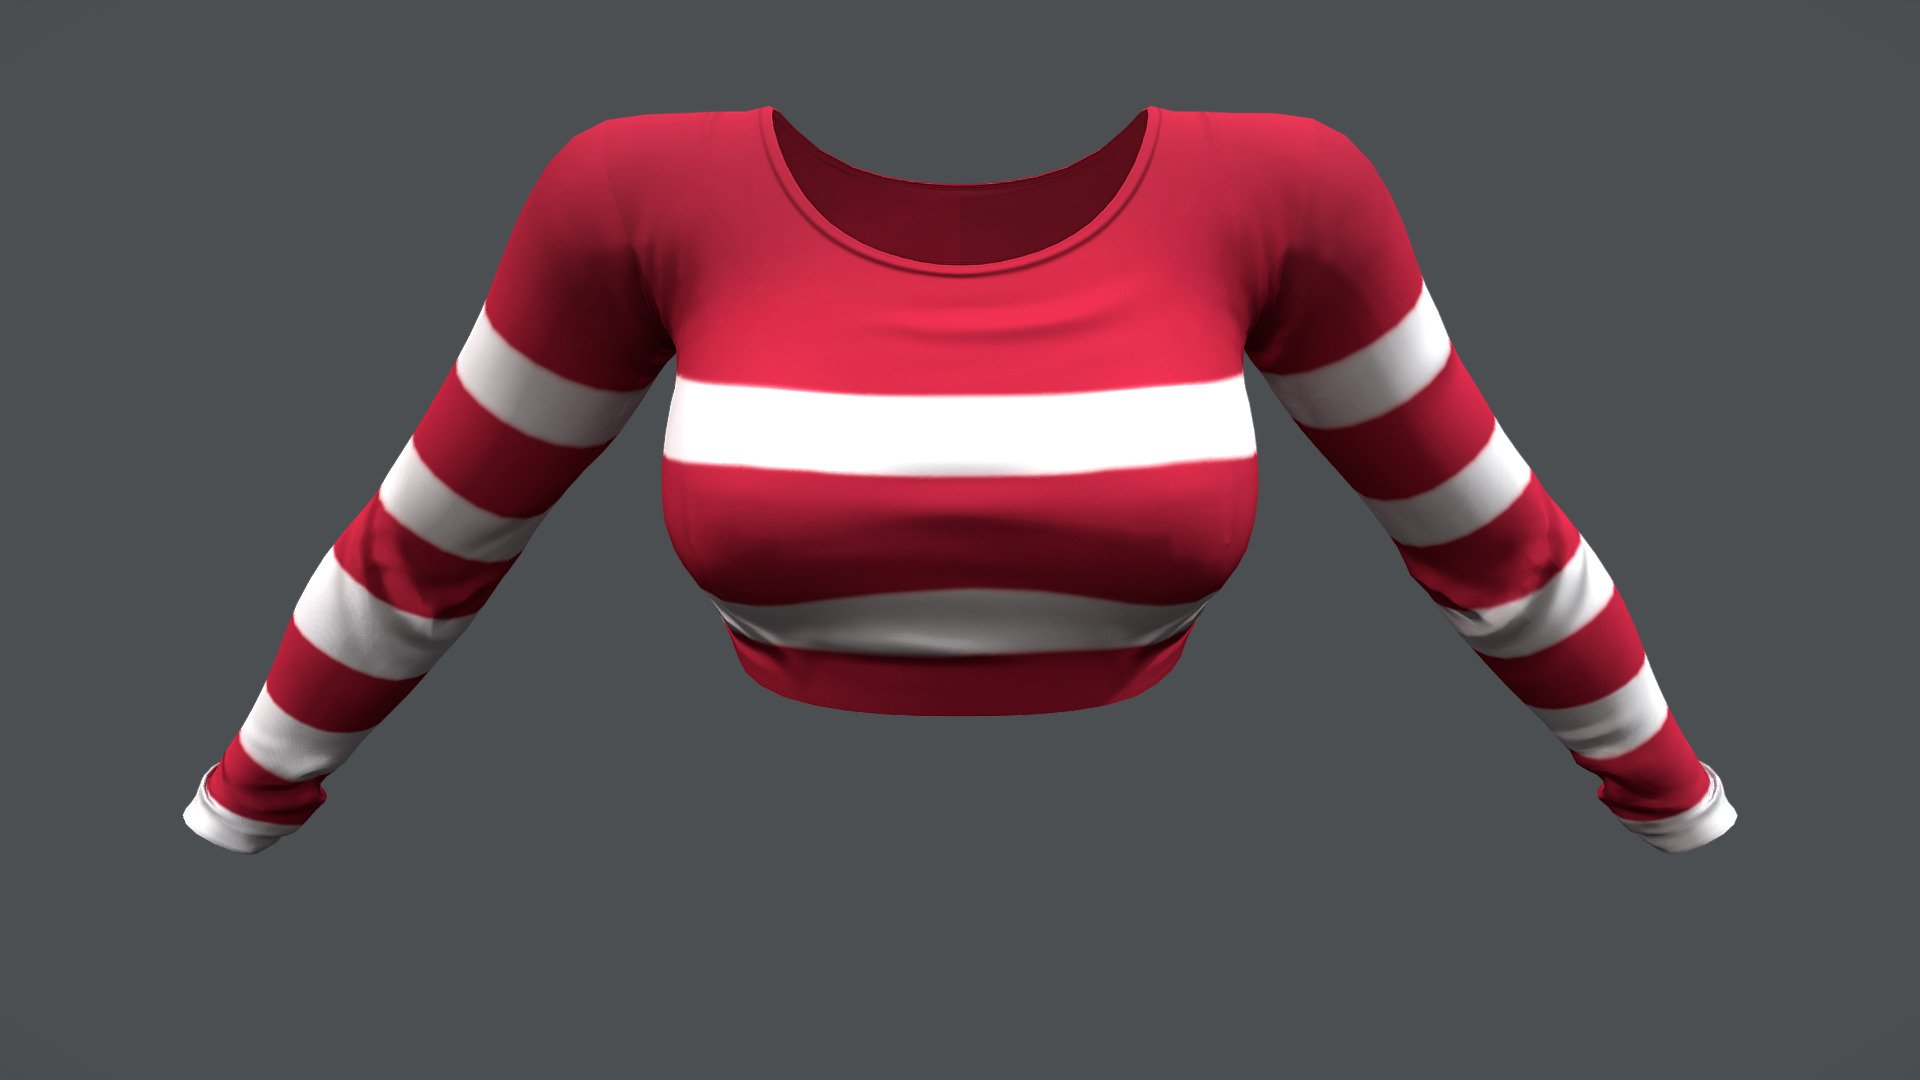 Female Sriped Long Sleeves Crop Sweater

Can be fitted to any character

Clean topology

No overlapping smart optimized unwrapped UVs

High-quality realistic textures

FBX, OBJ, gITF, USDZ (request other formats)

PBR or Classic

Type     user:3dia &ldquo;search term